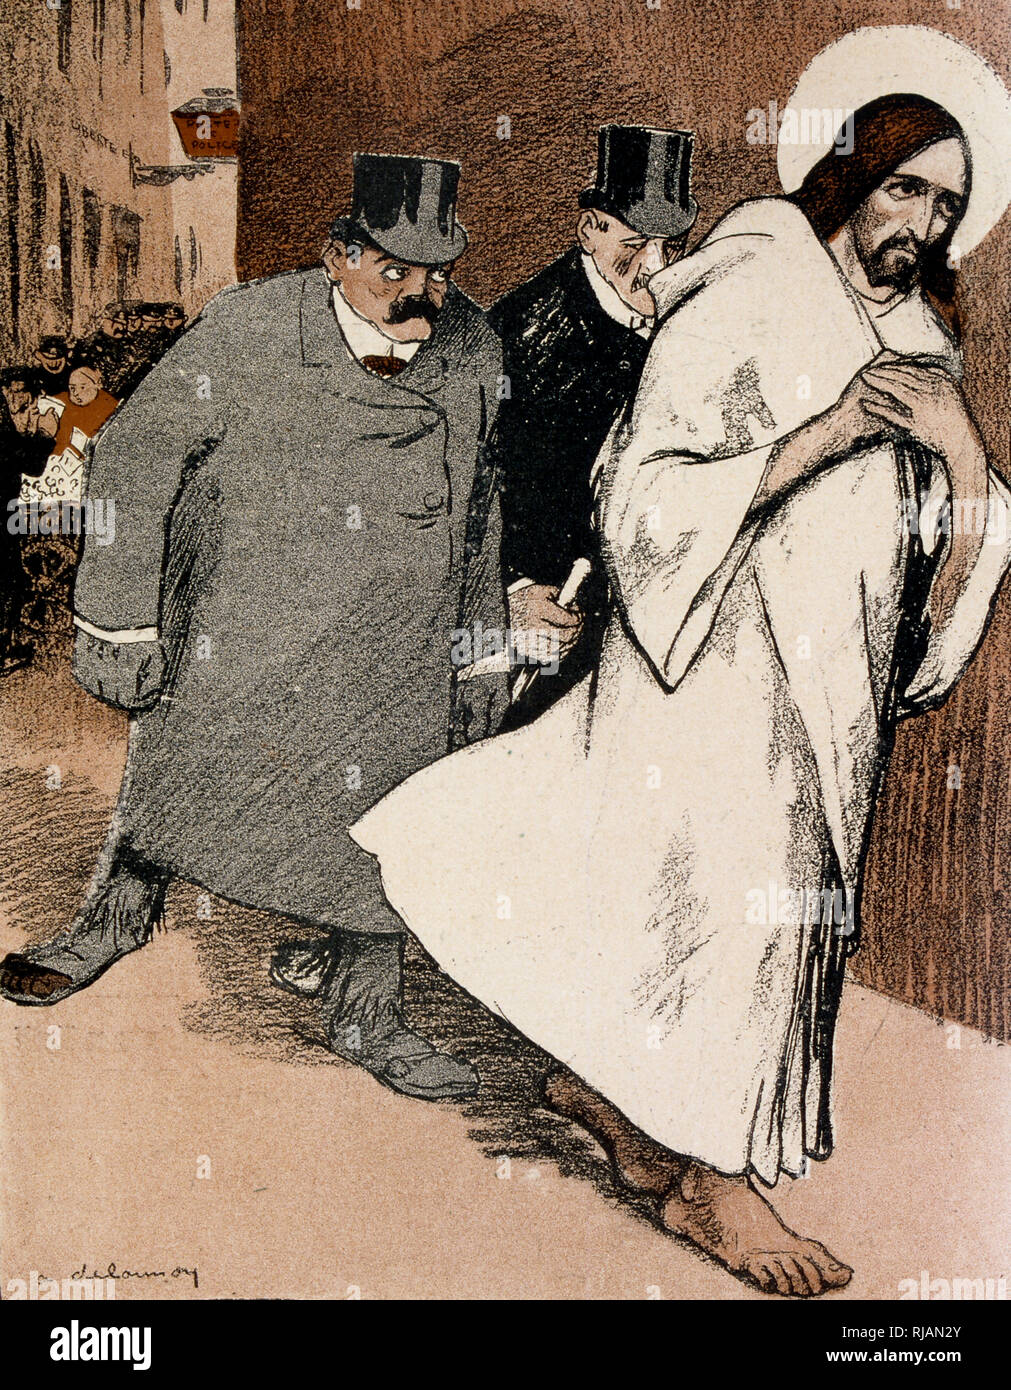 Caricature in L'Assiette du Beurre, 1904, depicting Jesus being pursued by representatives of the ruling classes in France Stock Photo